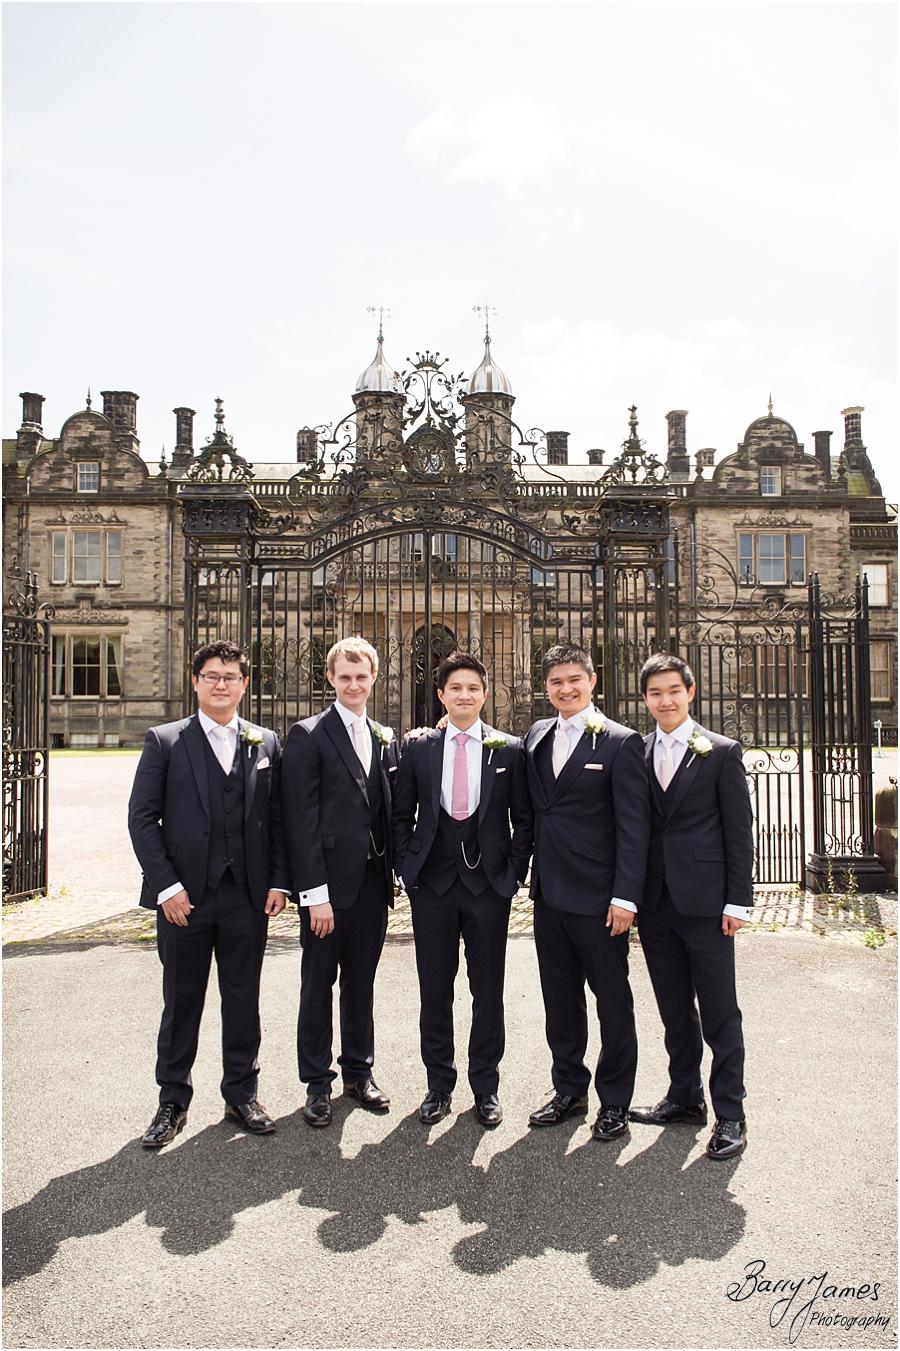 Contemporary portraits of the Groomsmen at the impressive Sandon Hall in Stafford by Stafford Wedding Photographer Barry James